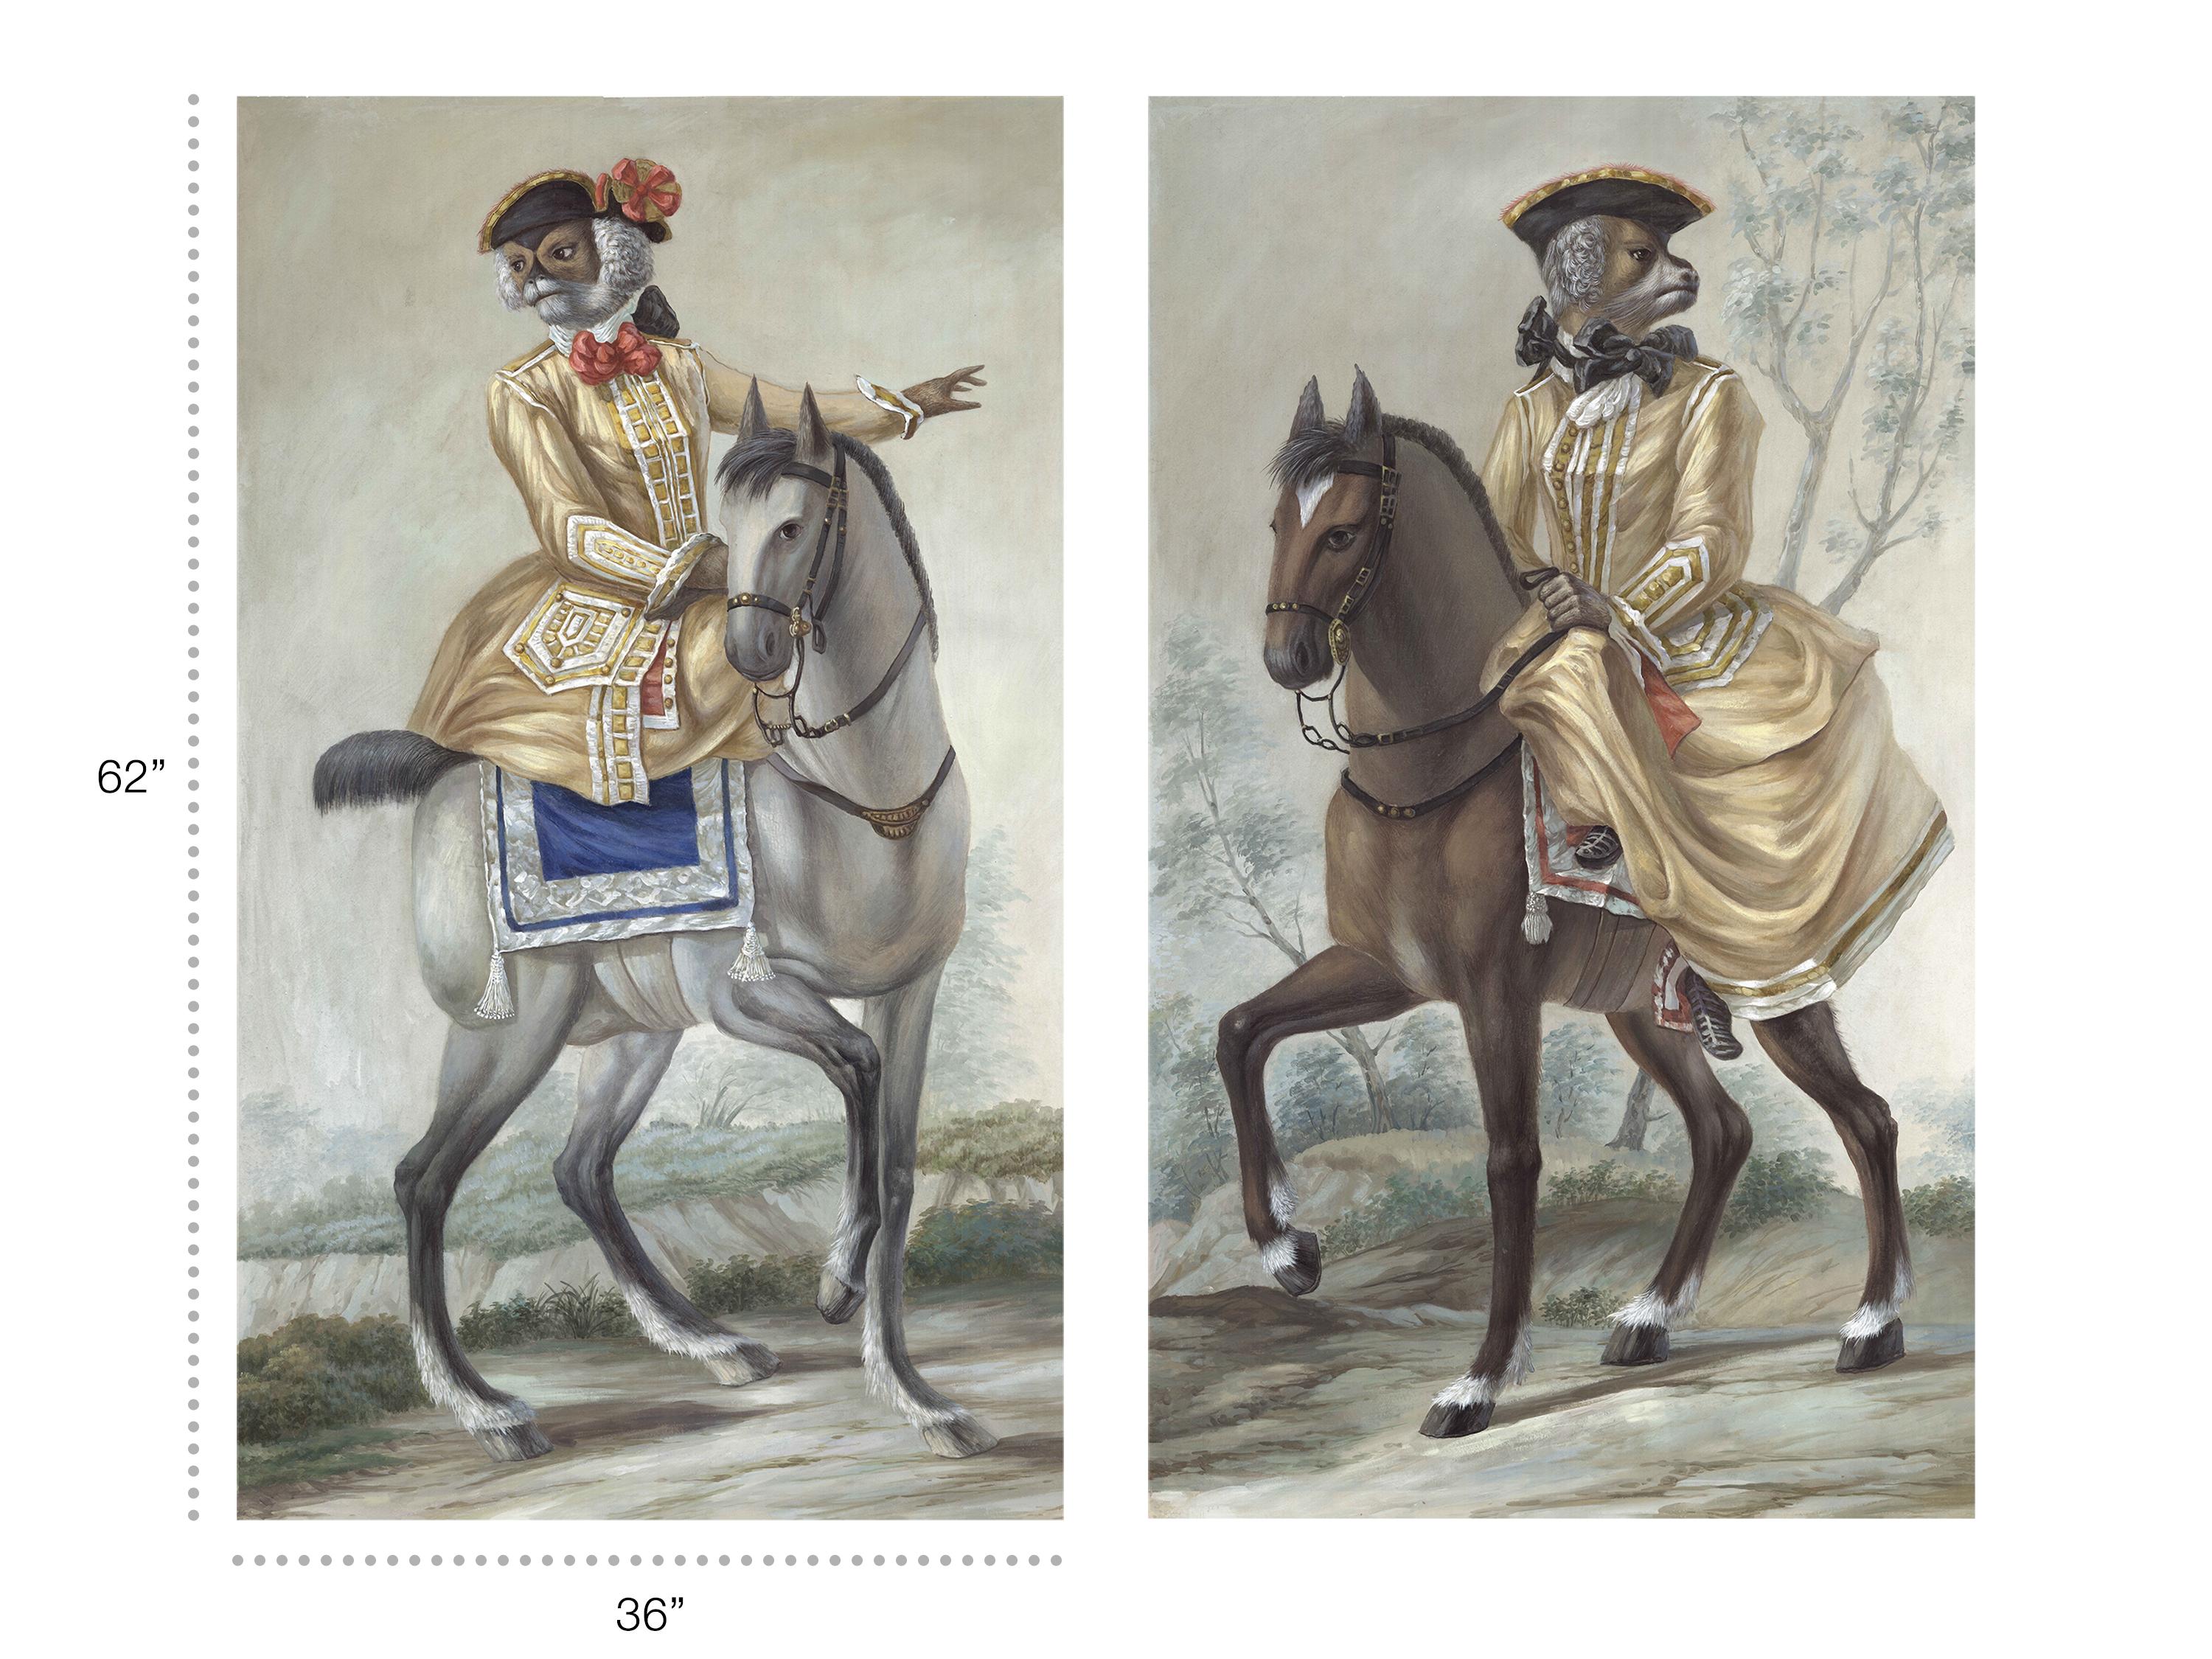 This pair of art pieces depicts the fantasy of two royal monkeys on horseback as is they were part of the sixteen century aristocracy.  Each panel is hand painted on a non-woven paper in the European brush style of the old masters.  Each panel is